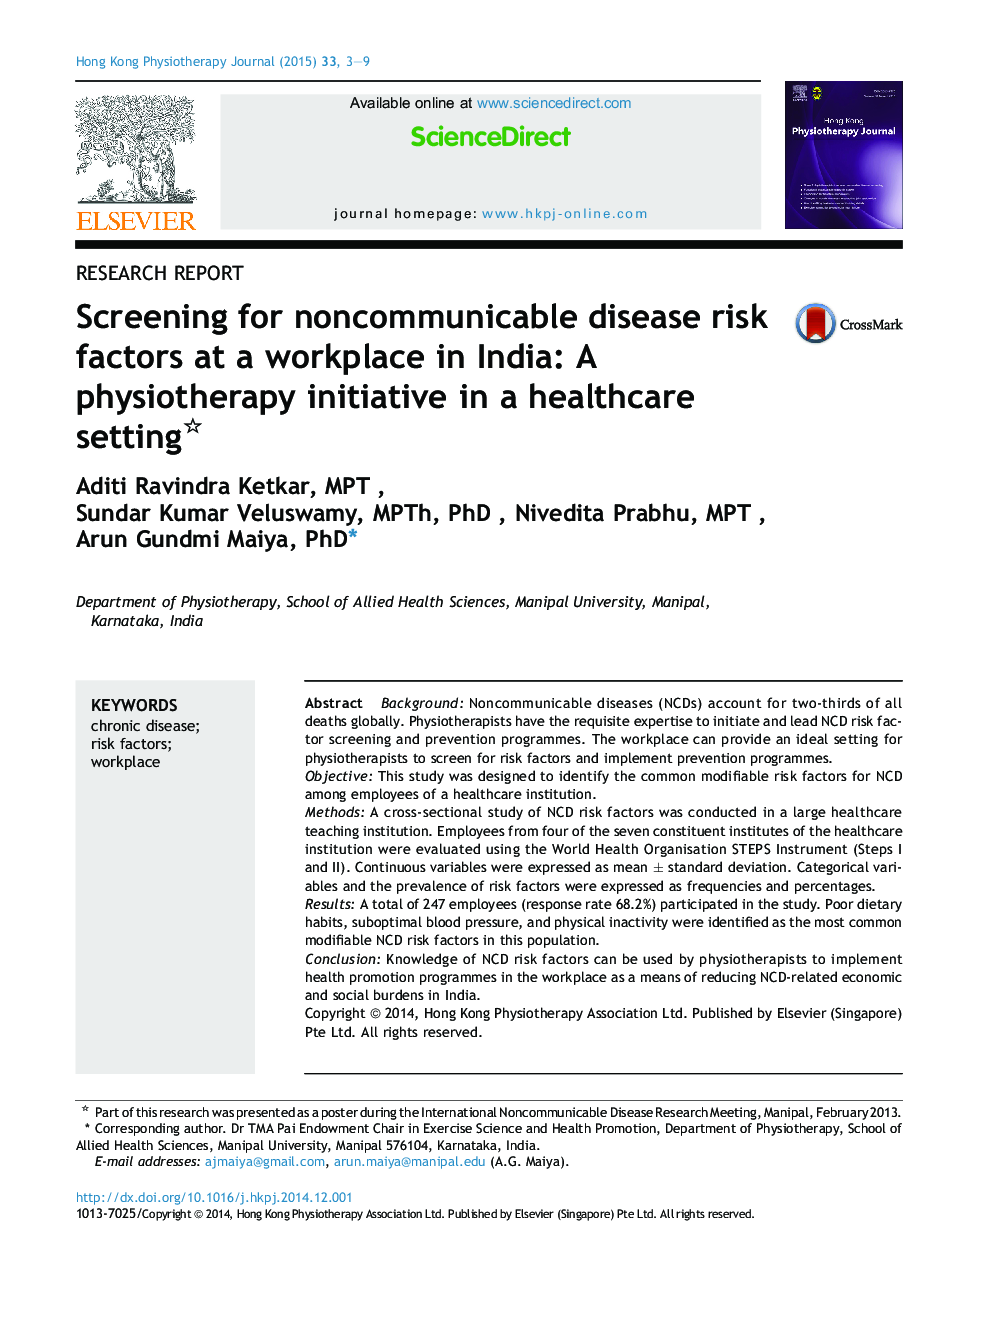 Screening for noncommunicable disease risk factors at a workplace in India: A physiotherapy initiative in a healthcare setting 